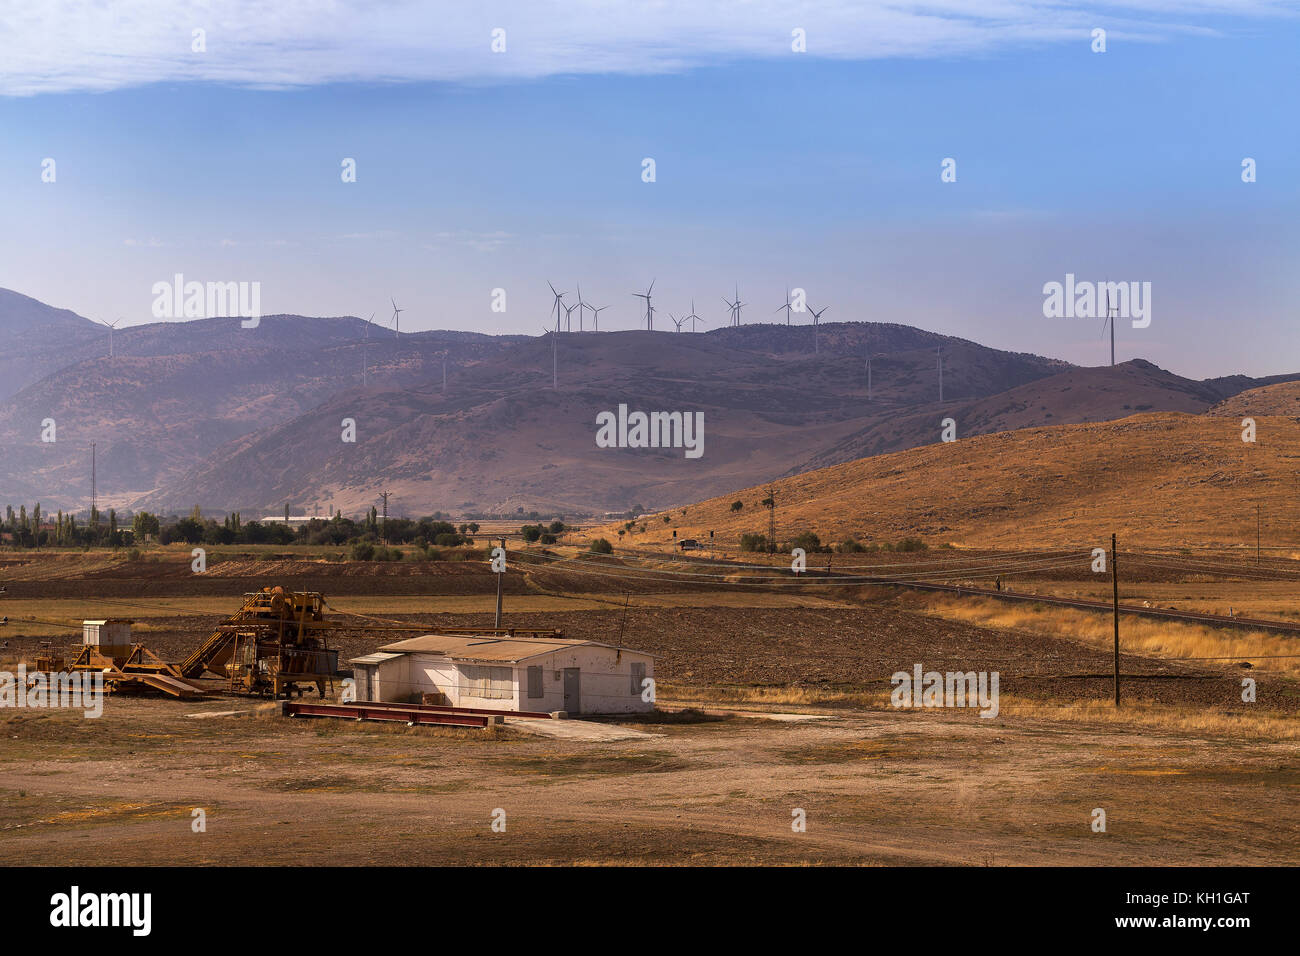 high hill landscape with wind turbines power energy for life Stock Photo